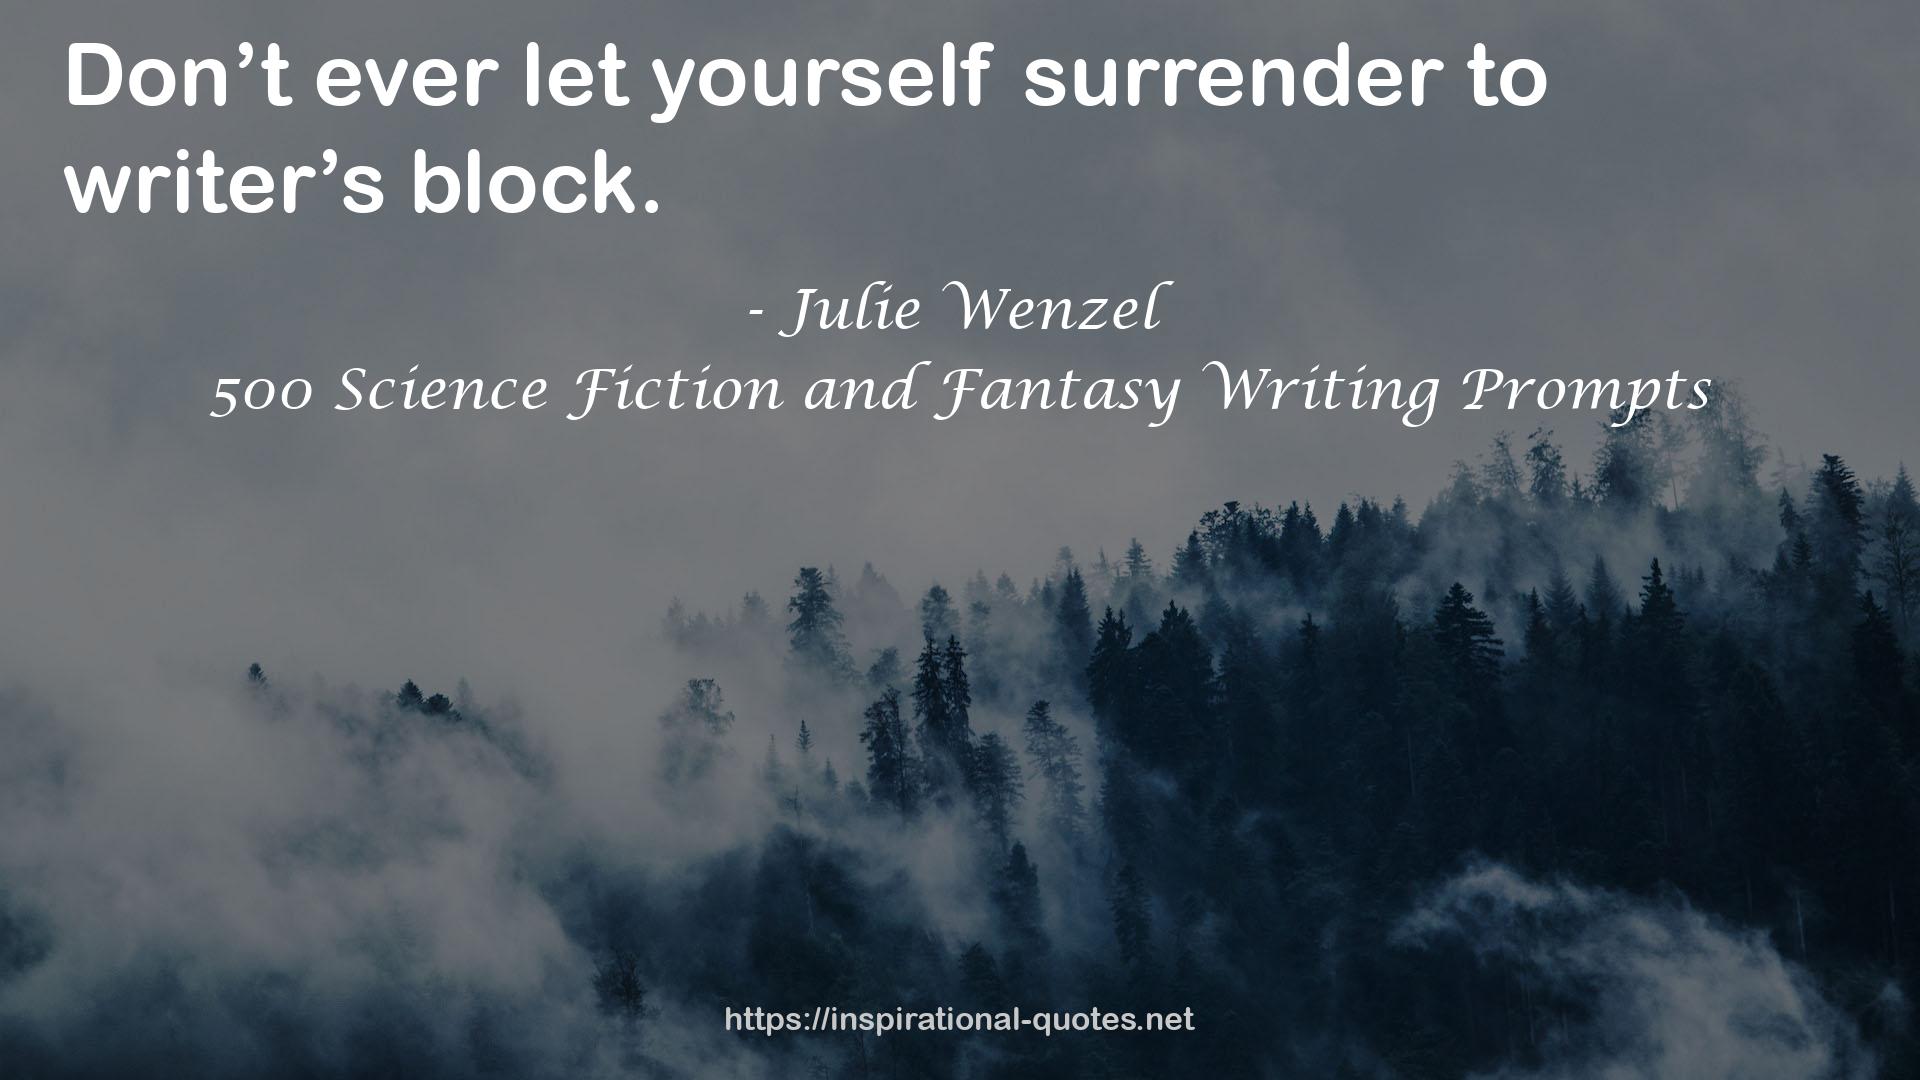 500 Science Fiction and Fantasy Writing Prompts QUOTES